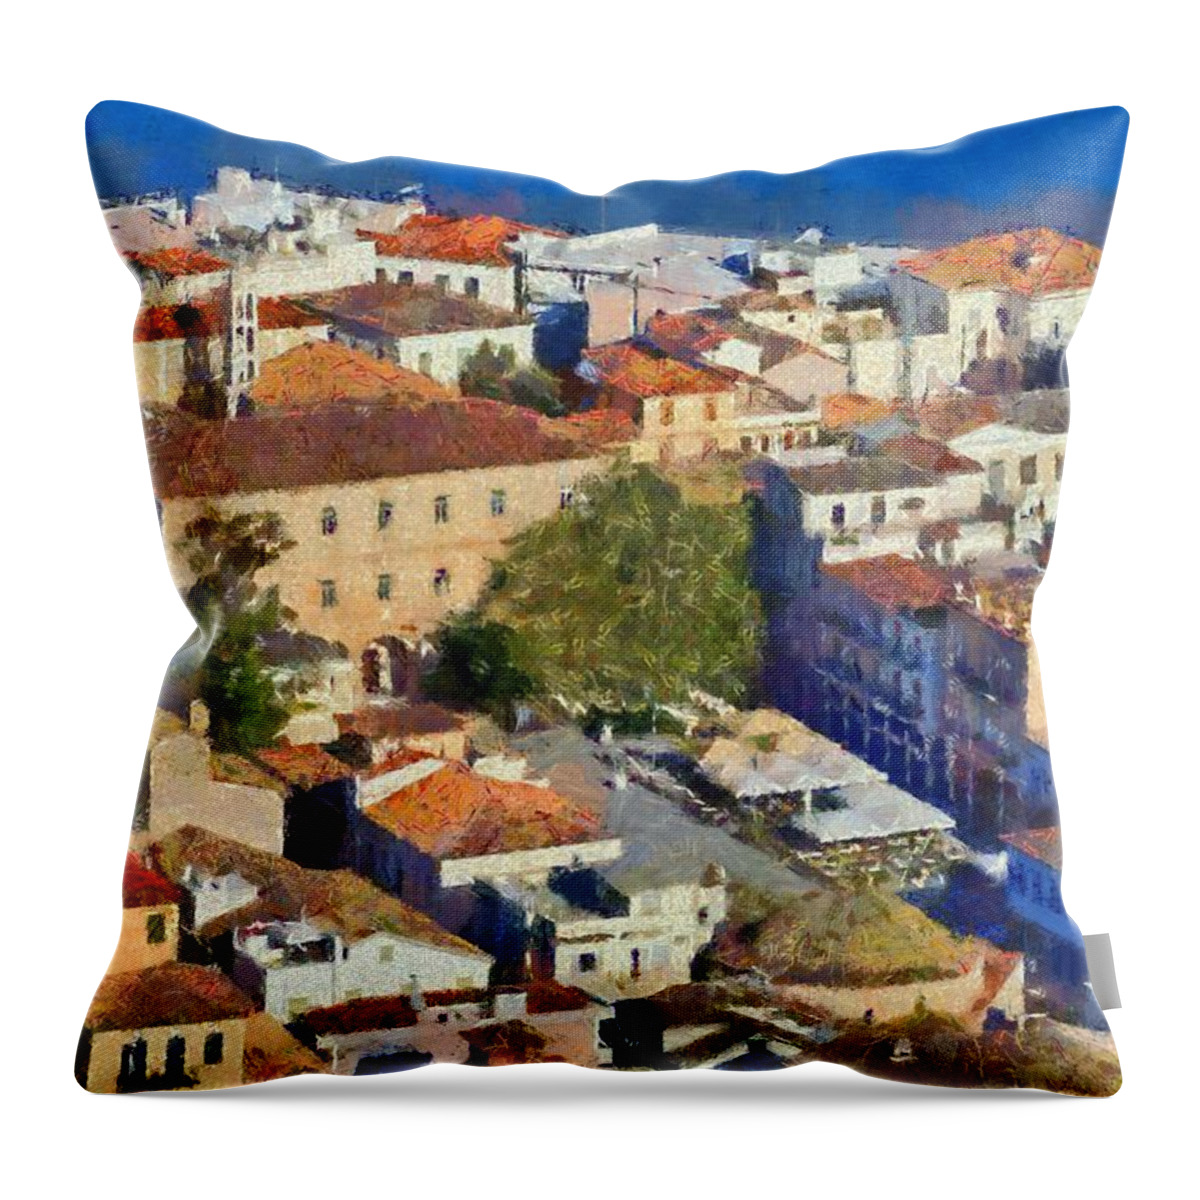 Nafplio; Old; City; Town; House; Houses; Color; Colour; Colorful; Colourful; Peloponnesus; Peloponnese; Argolis; Argolida; Greece; Greek; Hellas; Europe; European; Sea; Blue; Paint; Painting; Paintings Throw Pillow featuring the painting City of Nafplio #2 by George Atsametakis